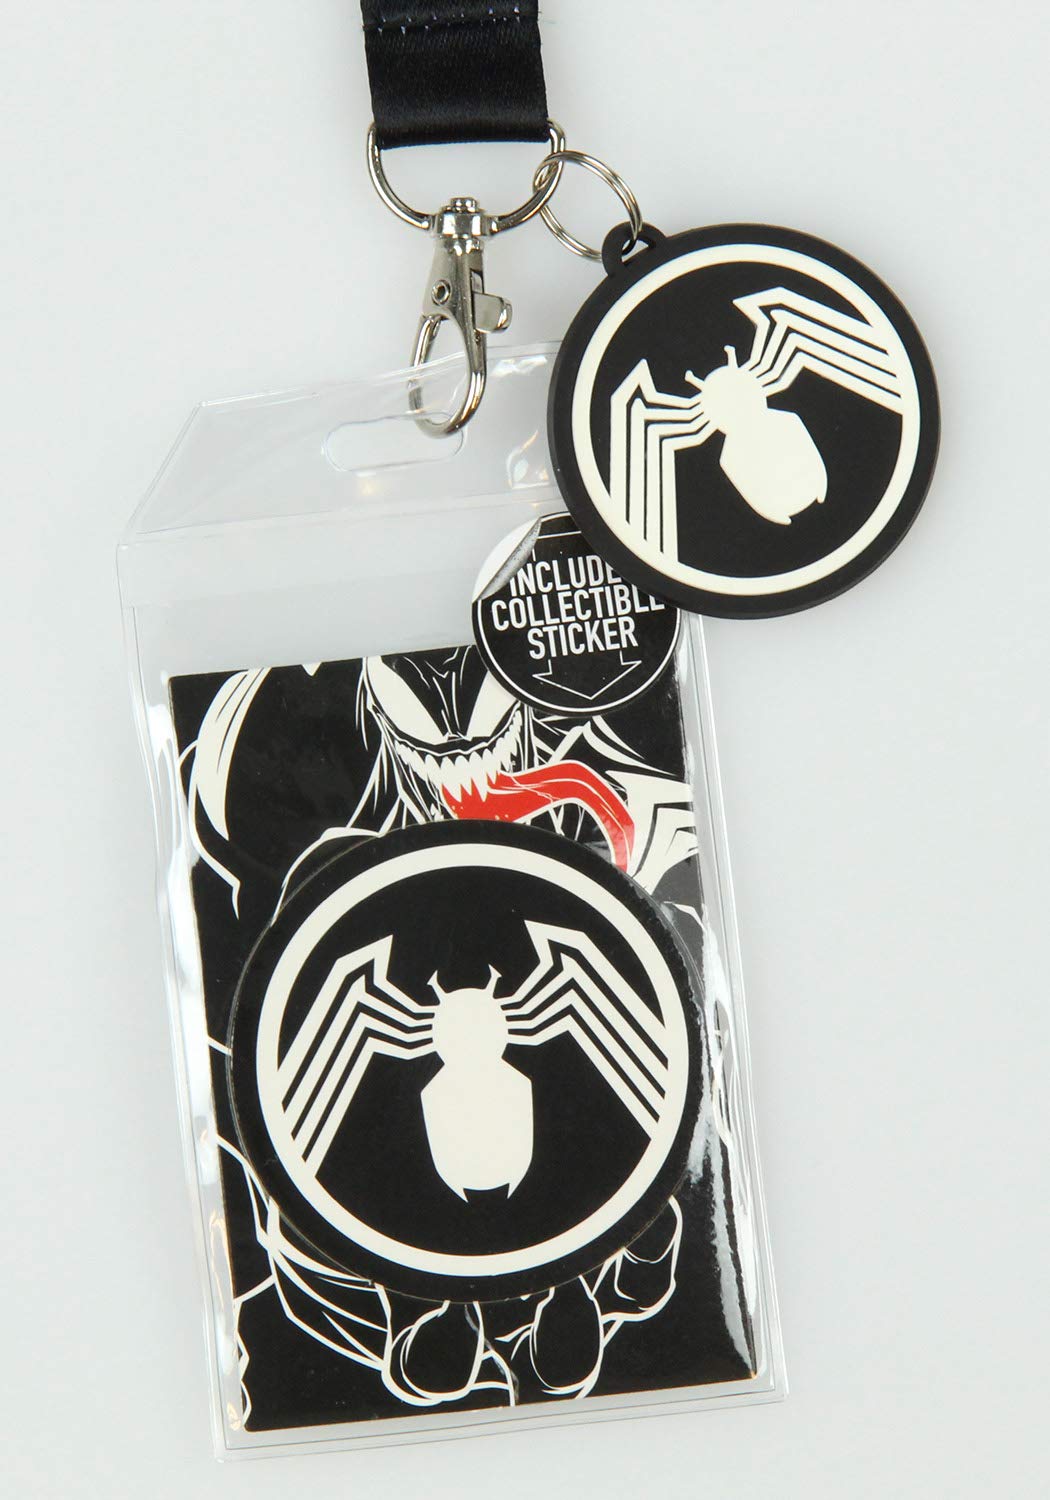 Marvel Venom Lanyard ID Badge Holder with 2" Character Logo Rubber Charm and Collectible Sticker